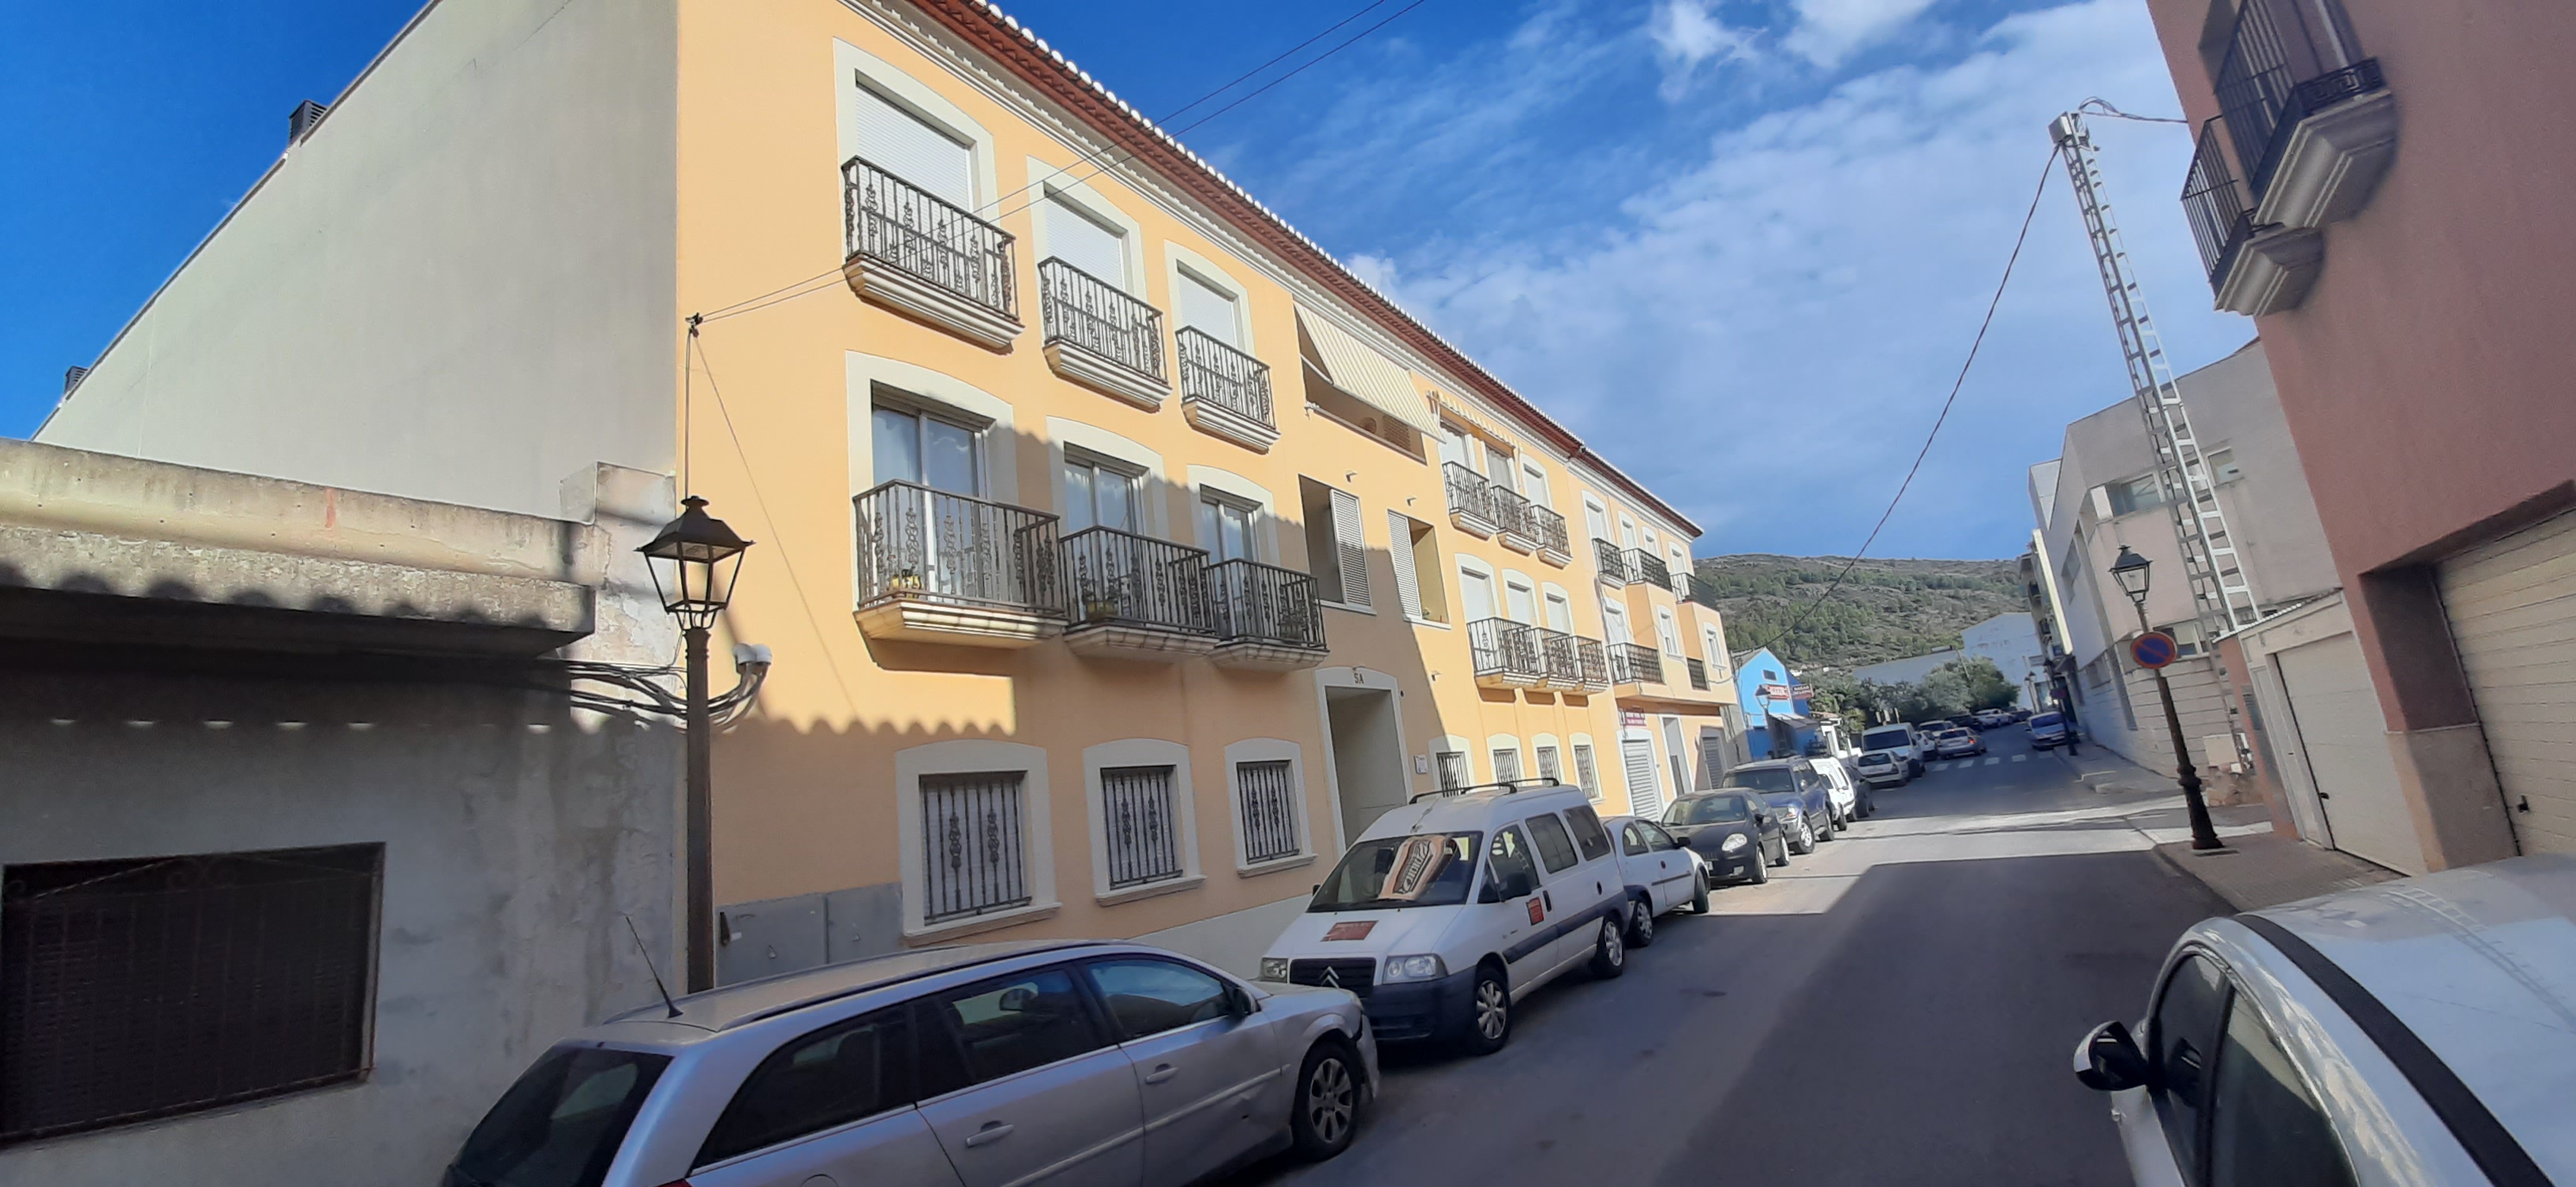 Apartment for Sale in Orba